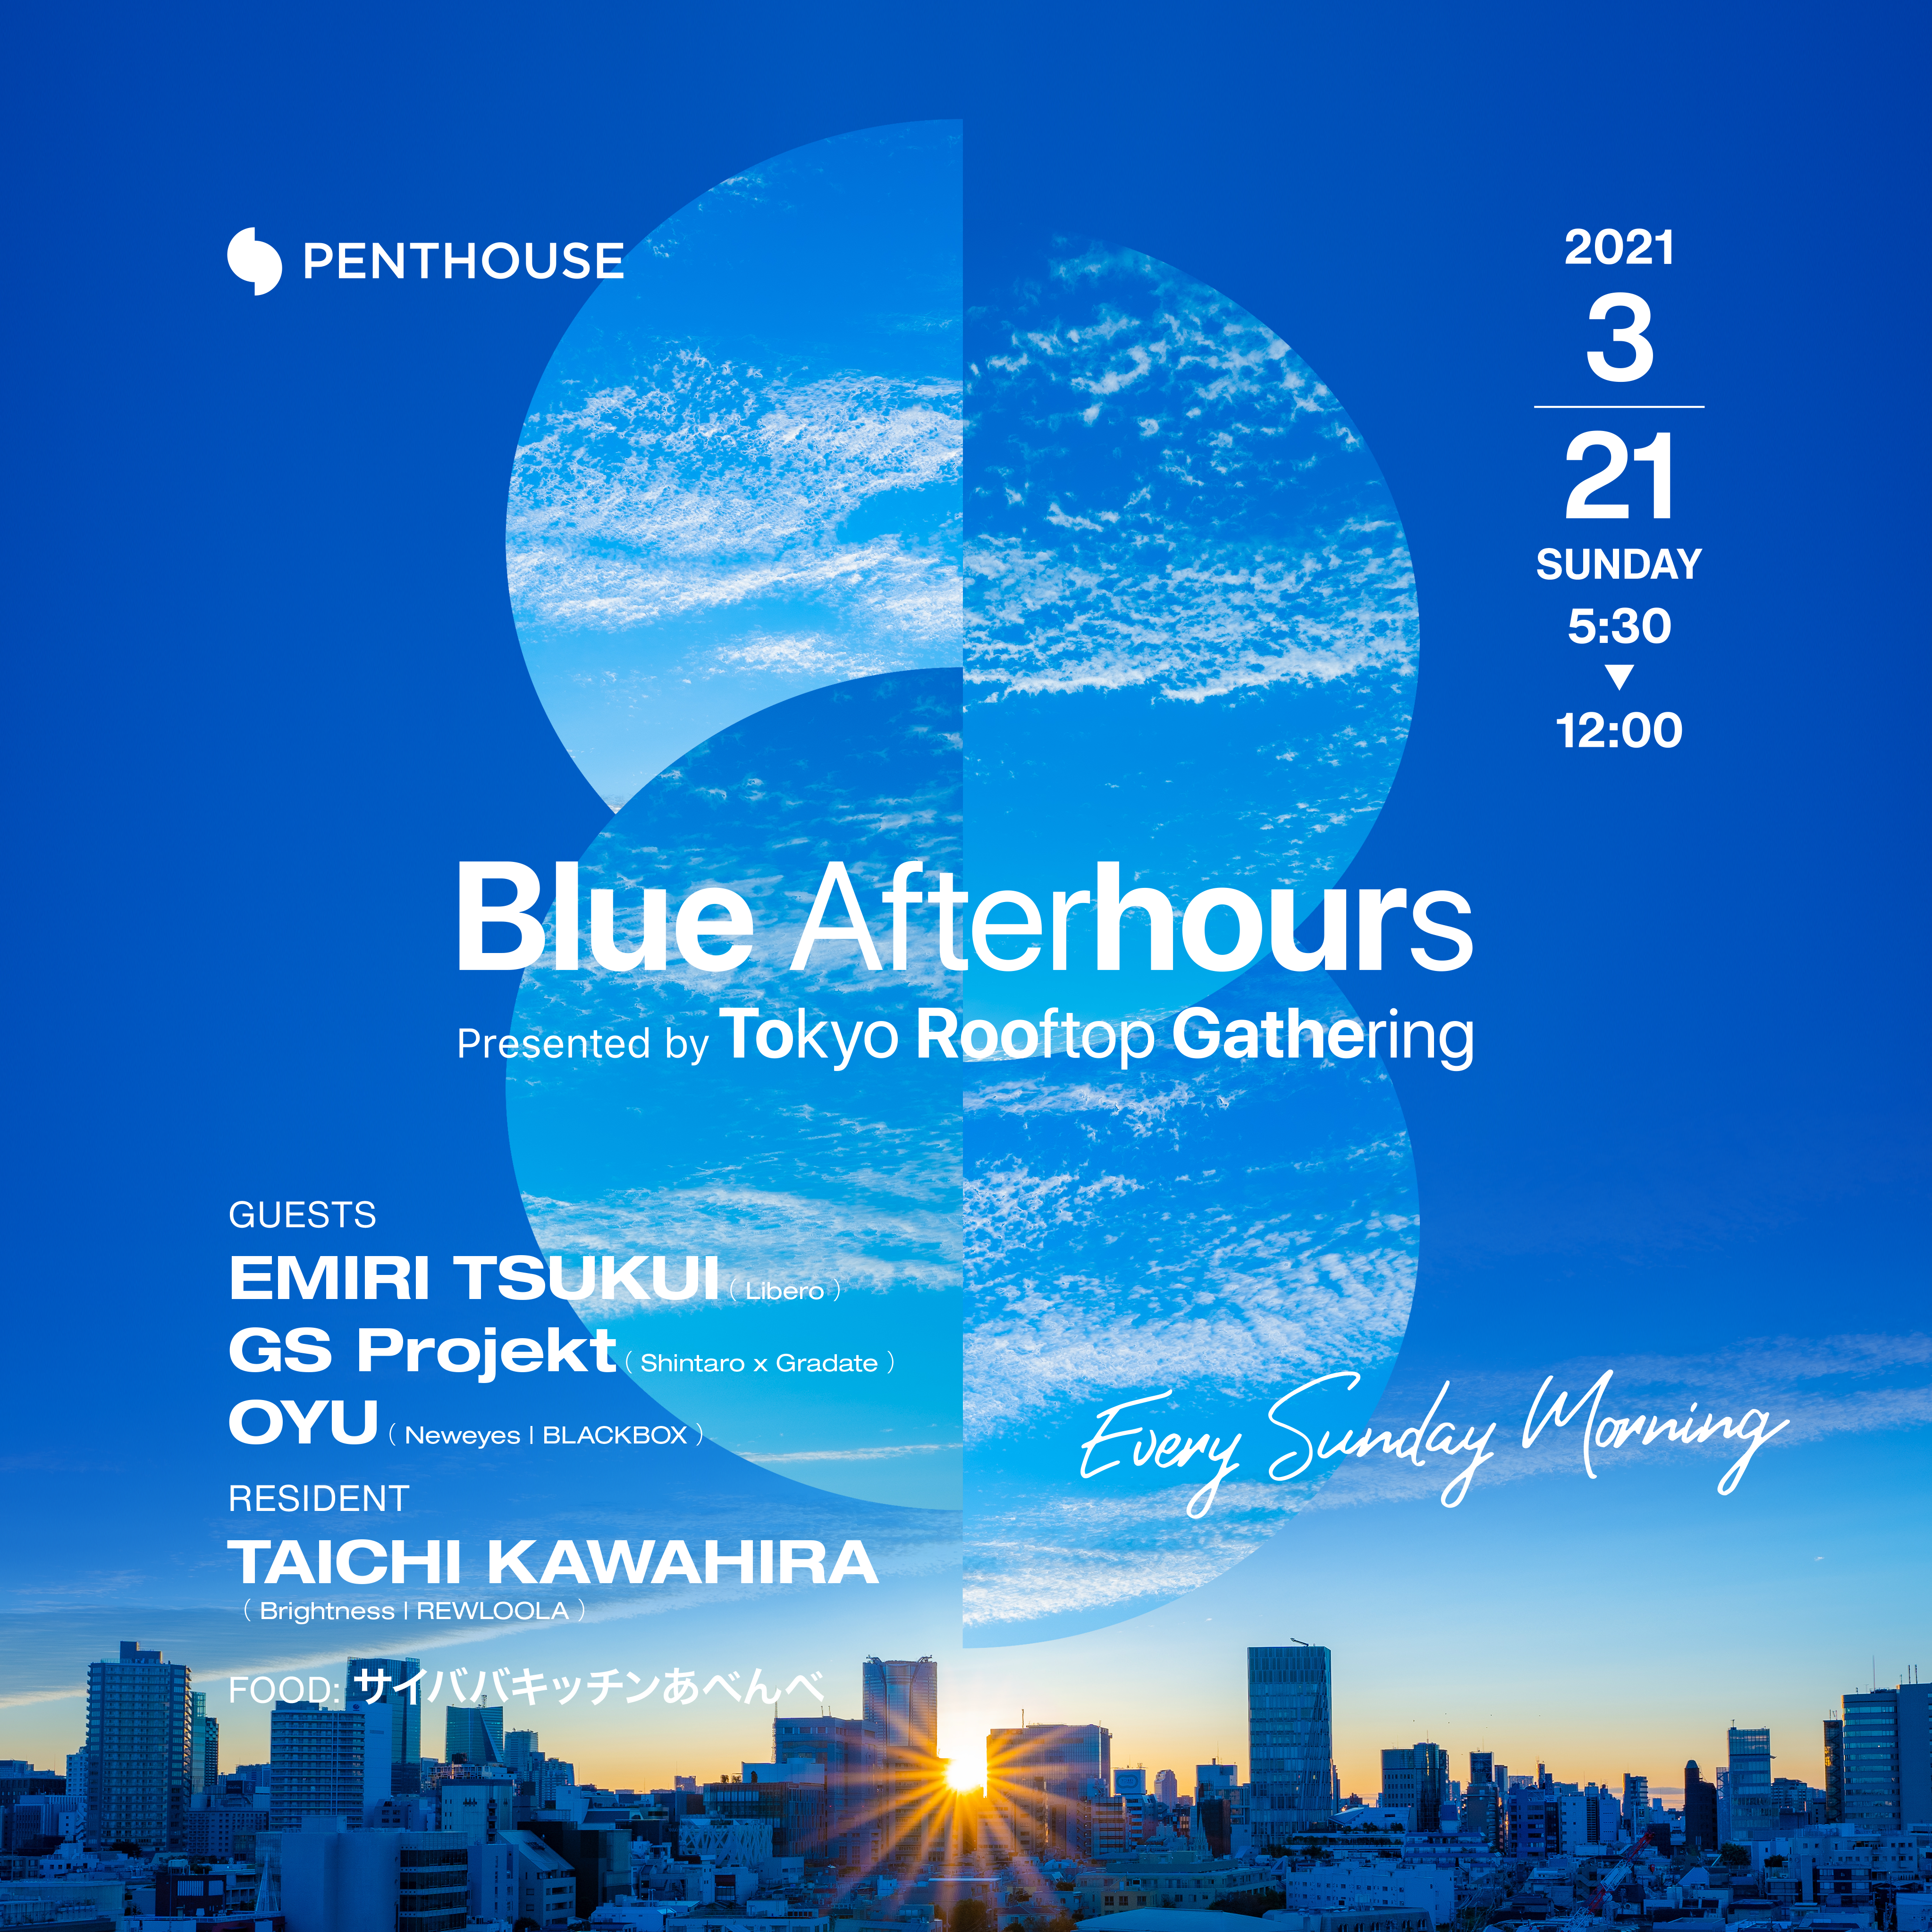 Blue Afterhours Presented by Tokyo Rooftop Gathering